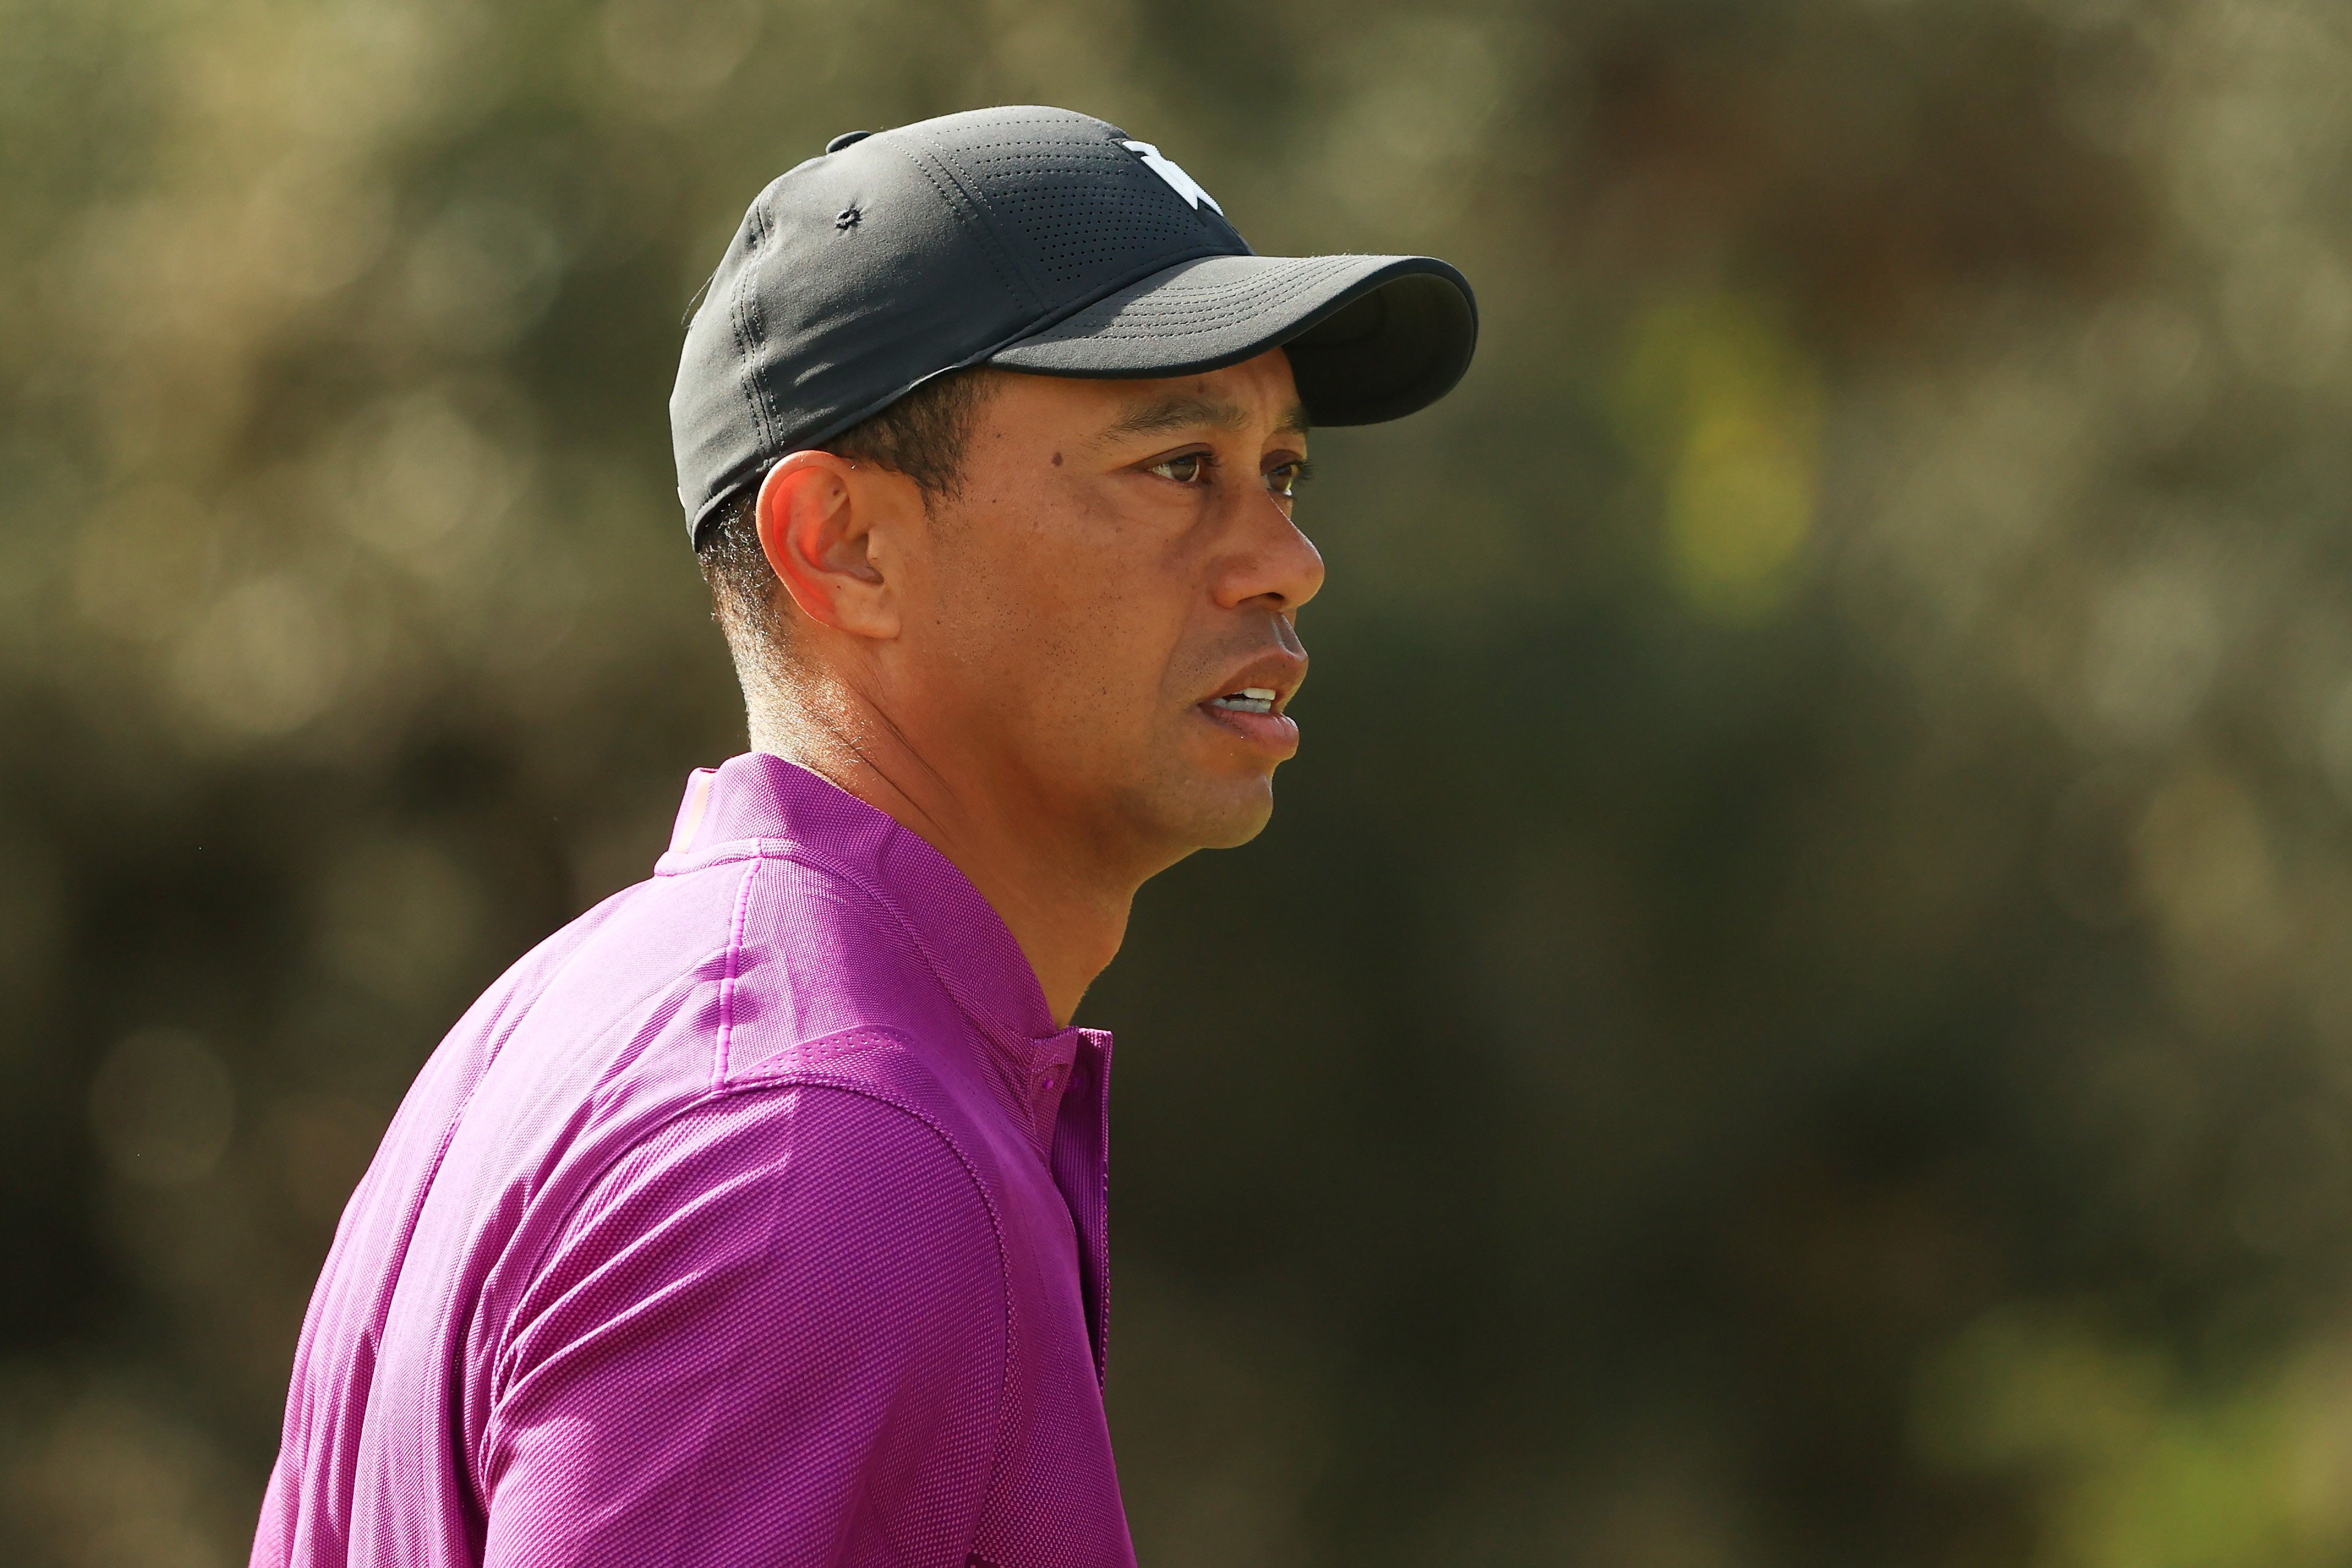 Tiger Woods during the first round of the PNC Championship at the Ritz-Carlton Golf Club Orlando on December 19, 2020 in Orlando, Florida. | Source: Getty Images